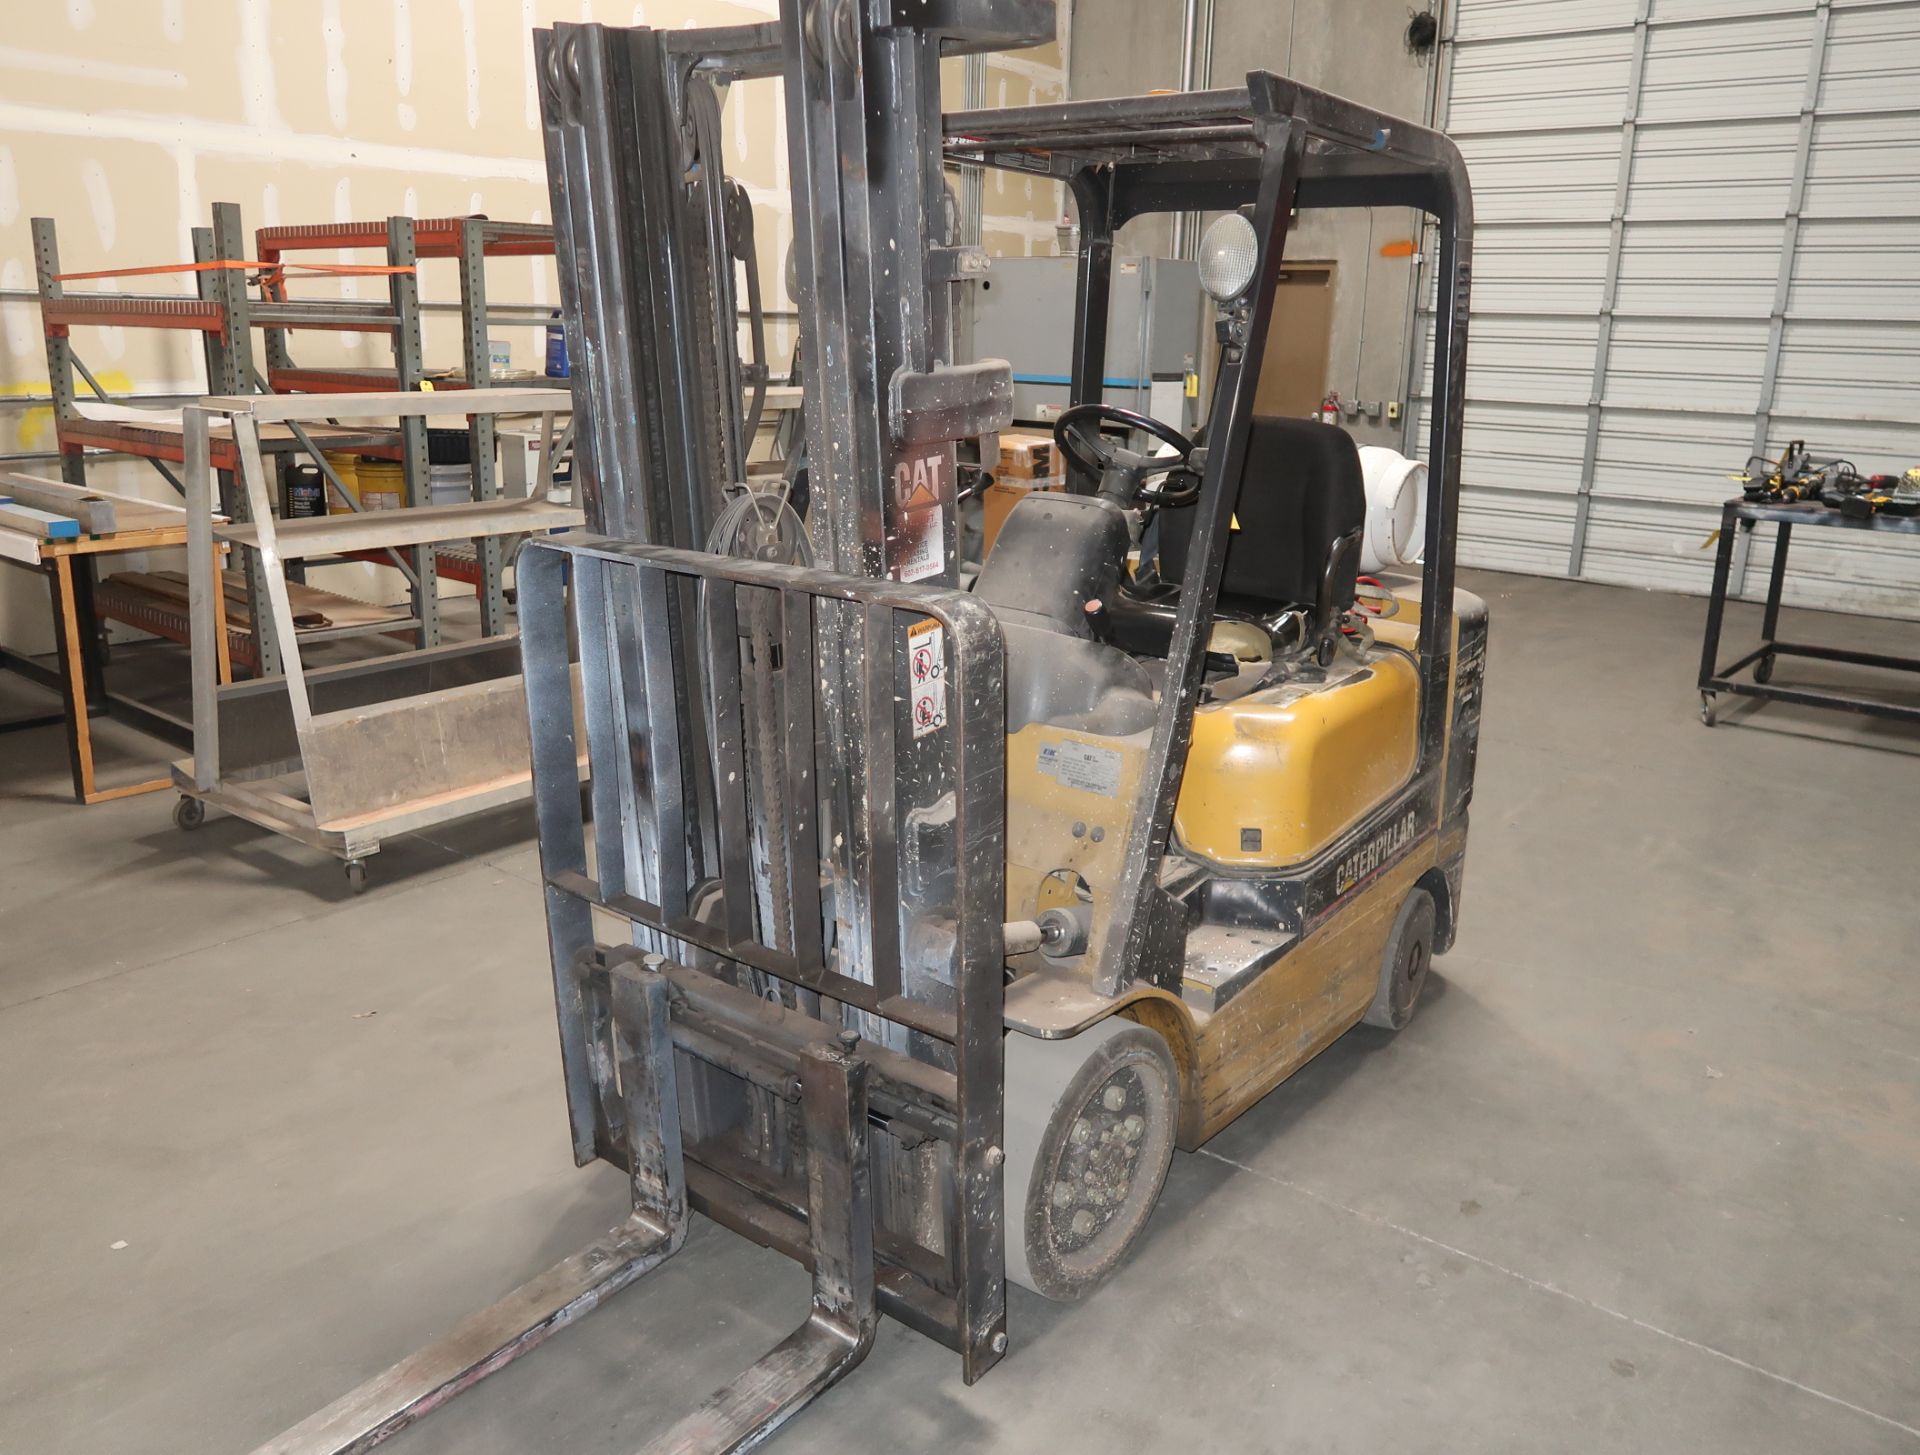 CATERPILLER MDL. GC25K1 5000# PROPANE FORKLIFT, SIDE SHIFT, 2-STAGE MAST, CUSHION TIRE, SN.